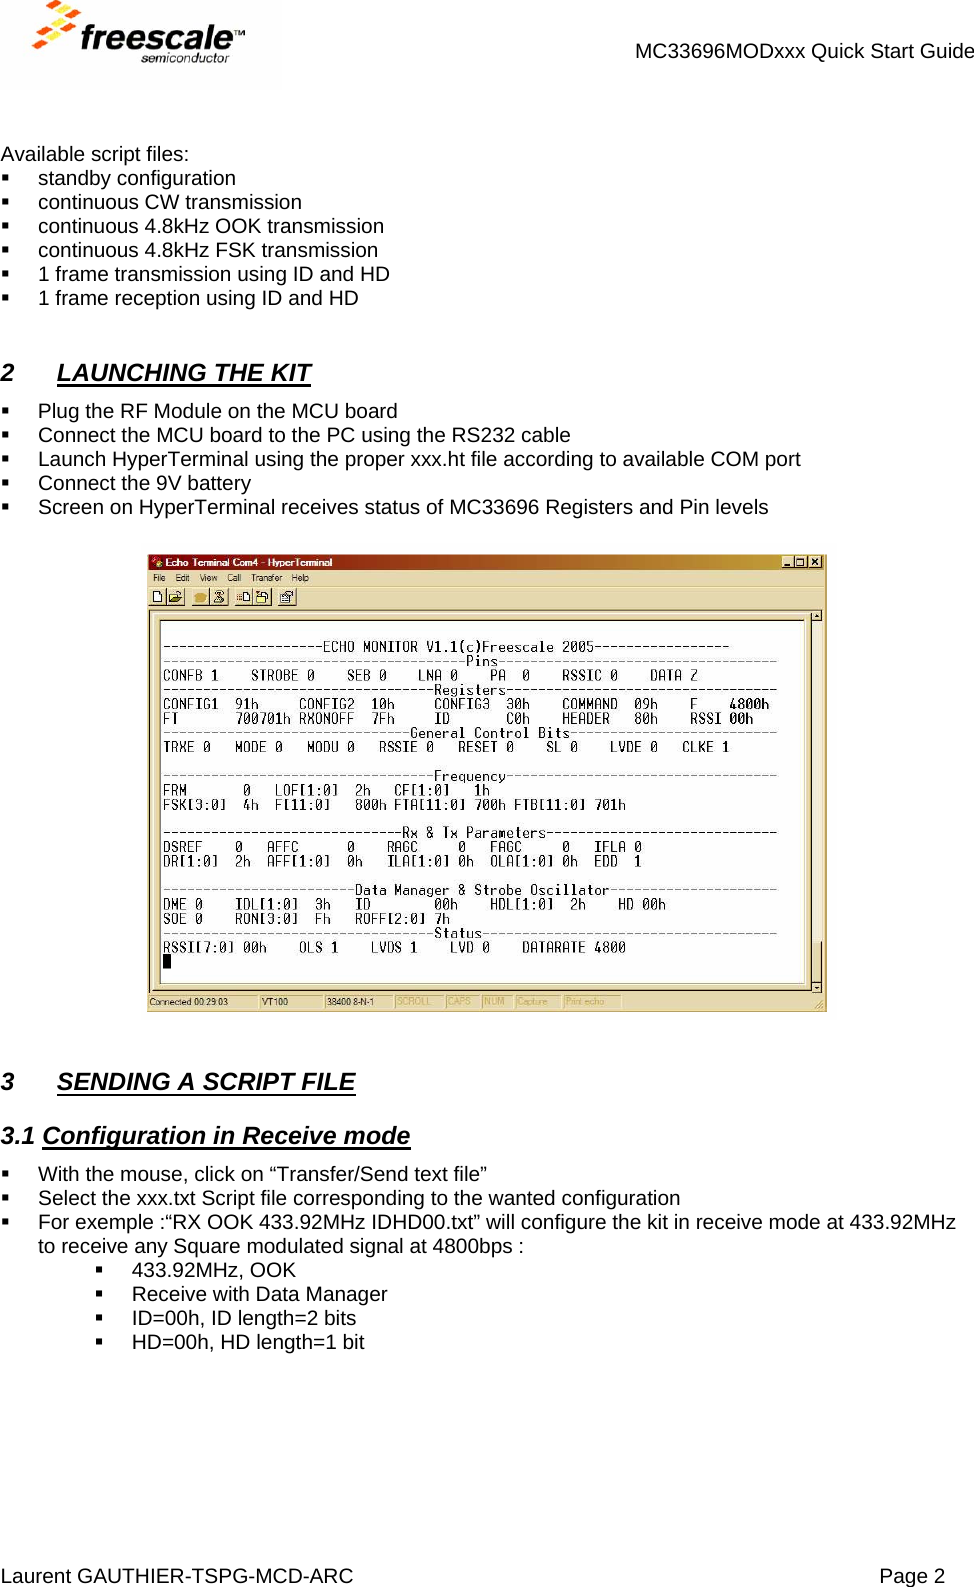 MC33696MODxxx Quick Start Guide Laurent GAUTHIER-TSPG-MCD-ARC  Page 2    Available script files:  standby configuration   continuous CW transmission   continuous 4.8kHz OOK transmission   continuous 4.8kHz FSK transmission   1 frame transmission using ID and HD   1 frame reception using ID and HD   2  LAUNCHING THE KIT   Plug the RF Module on the MCU board   Connect the MCU board to the PC using the RS232 cable   Launch HyperTerminal using the proper xxx.ht file according to available COM port   Connect the 9V battery   Screen on HyperTerminal receives status of MC33696 Registers and Pin levels     3  SENDING A SCRIPT FILE 3.1 Configuration in Receive mode   With the mouse, click on “Transfer/Send text file”   Select the xxx.txt Script file corresponding to the wanted configuration   For exemple :“RX OOK 433.92MHz IDHD00.txt” will configure the kit in receive mode at 433.92MHz to receive any Square modulated signal at 4800bps :  433.92MHz, OOK   Receive with Data Manager   ID=00h, ID length=2 bits   HD=00h, HD length=1 bit   